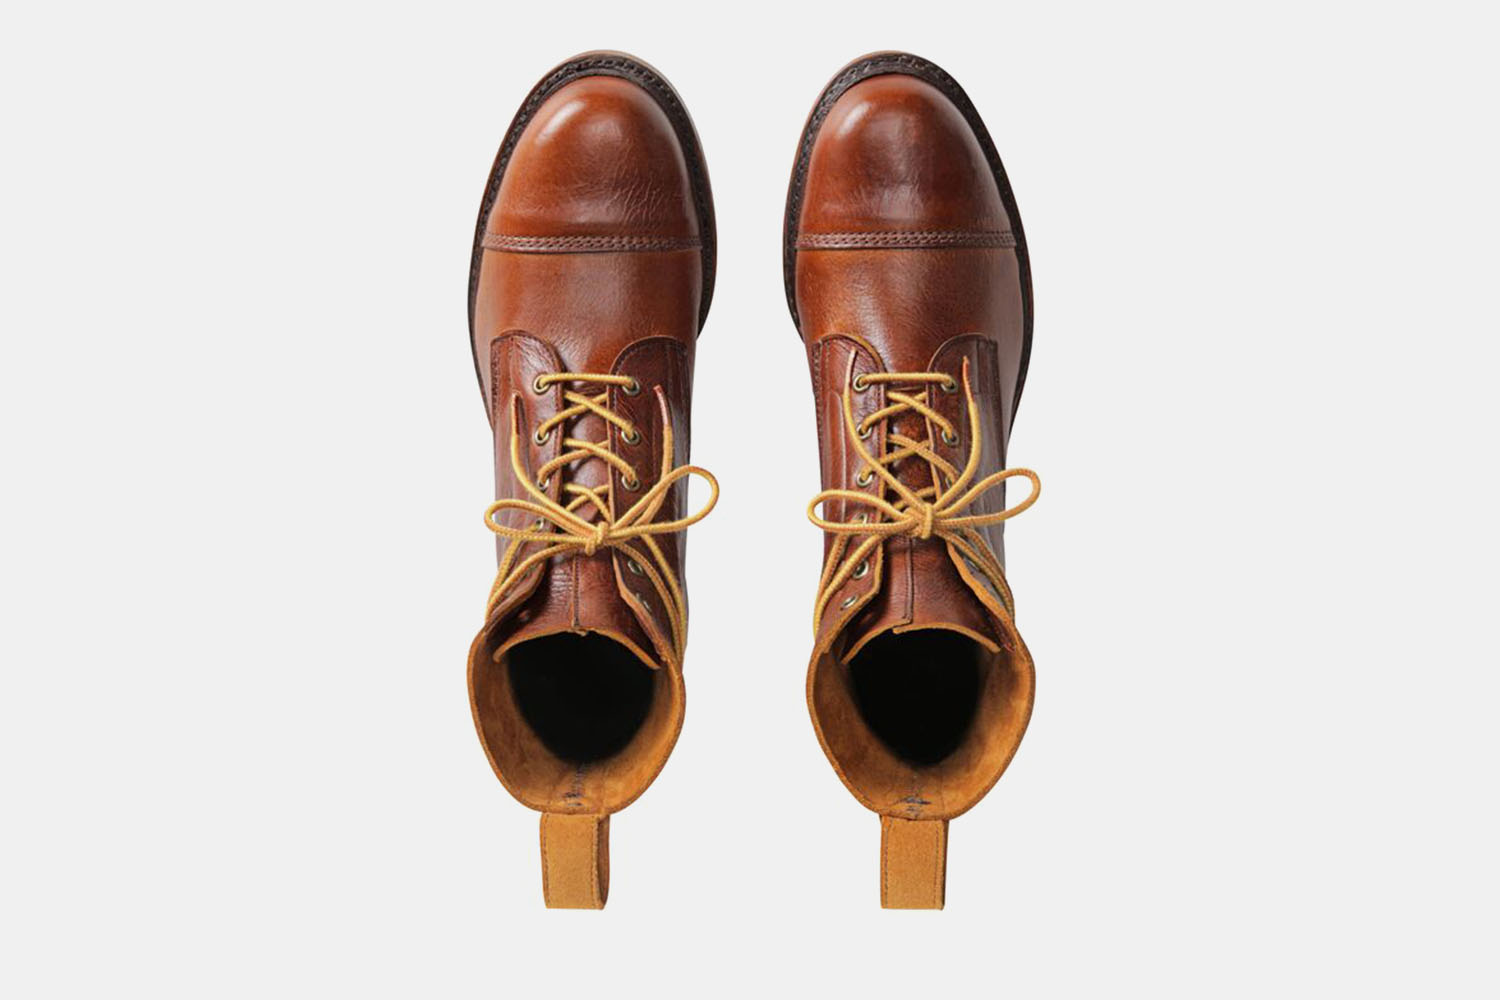 Deal: Select Allen Edmonds Boots Are Up to 30% Off